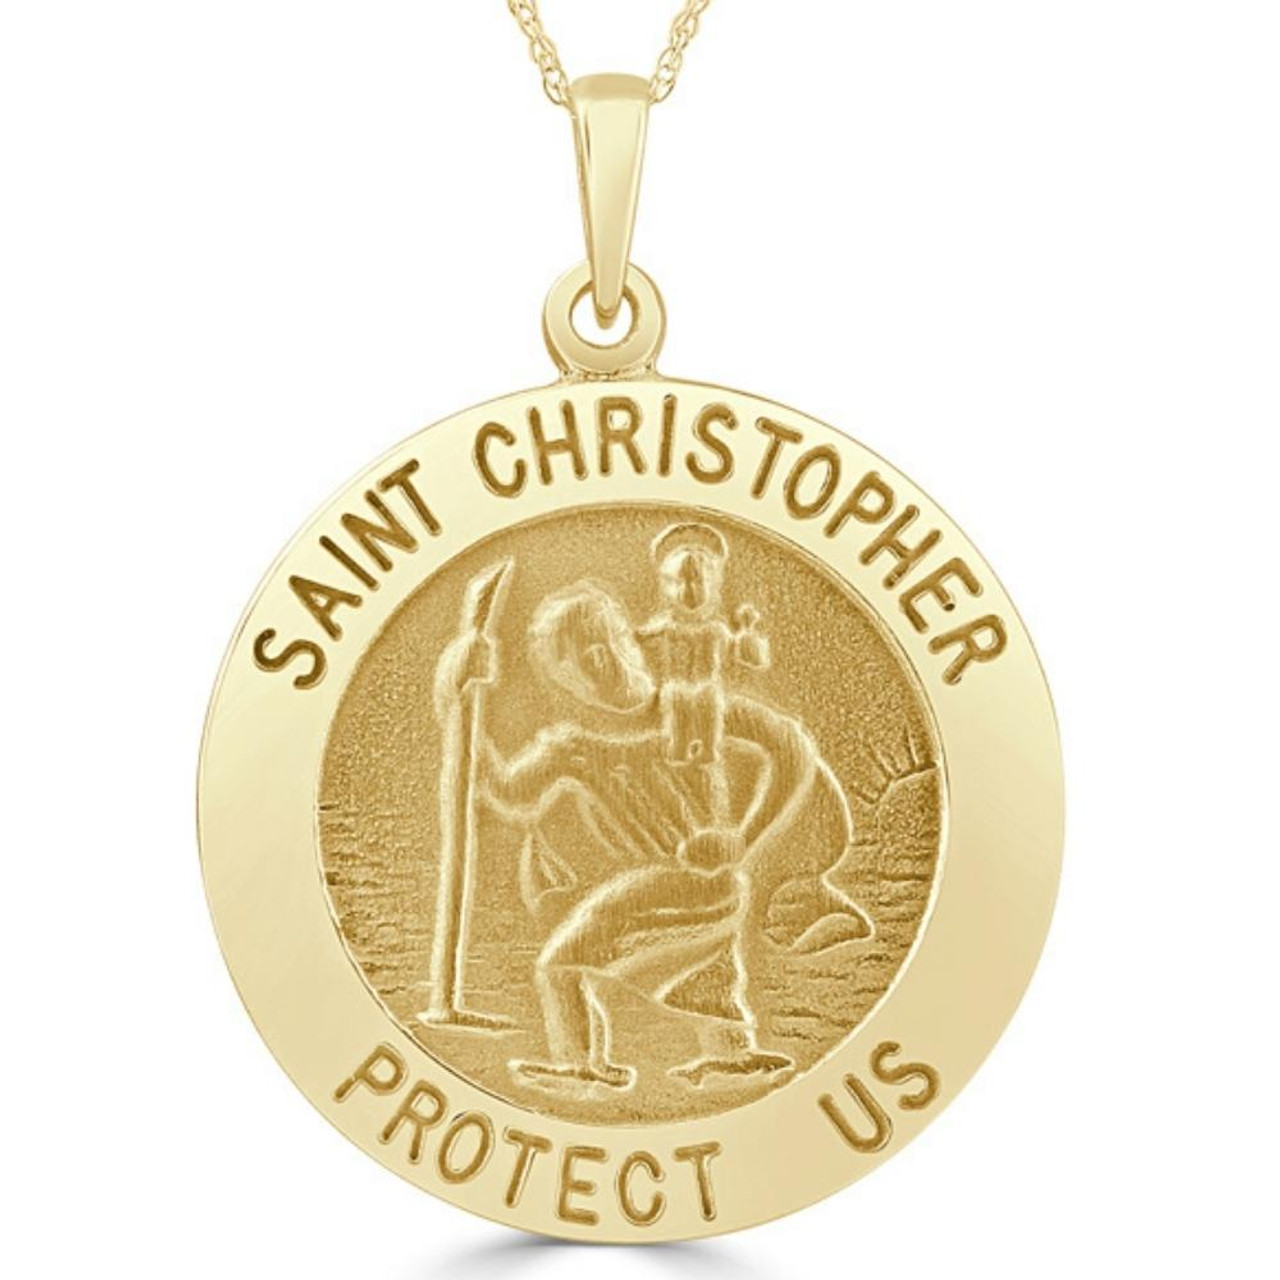 Gold Plated St Christopher Necklace by Philip Jones Jewellery